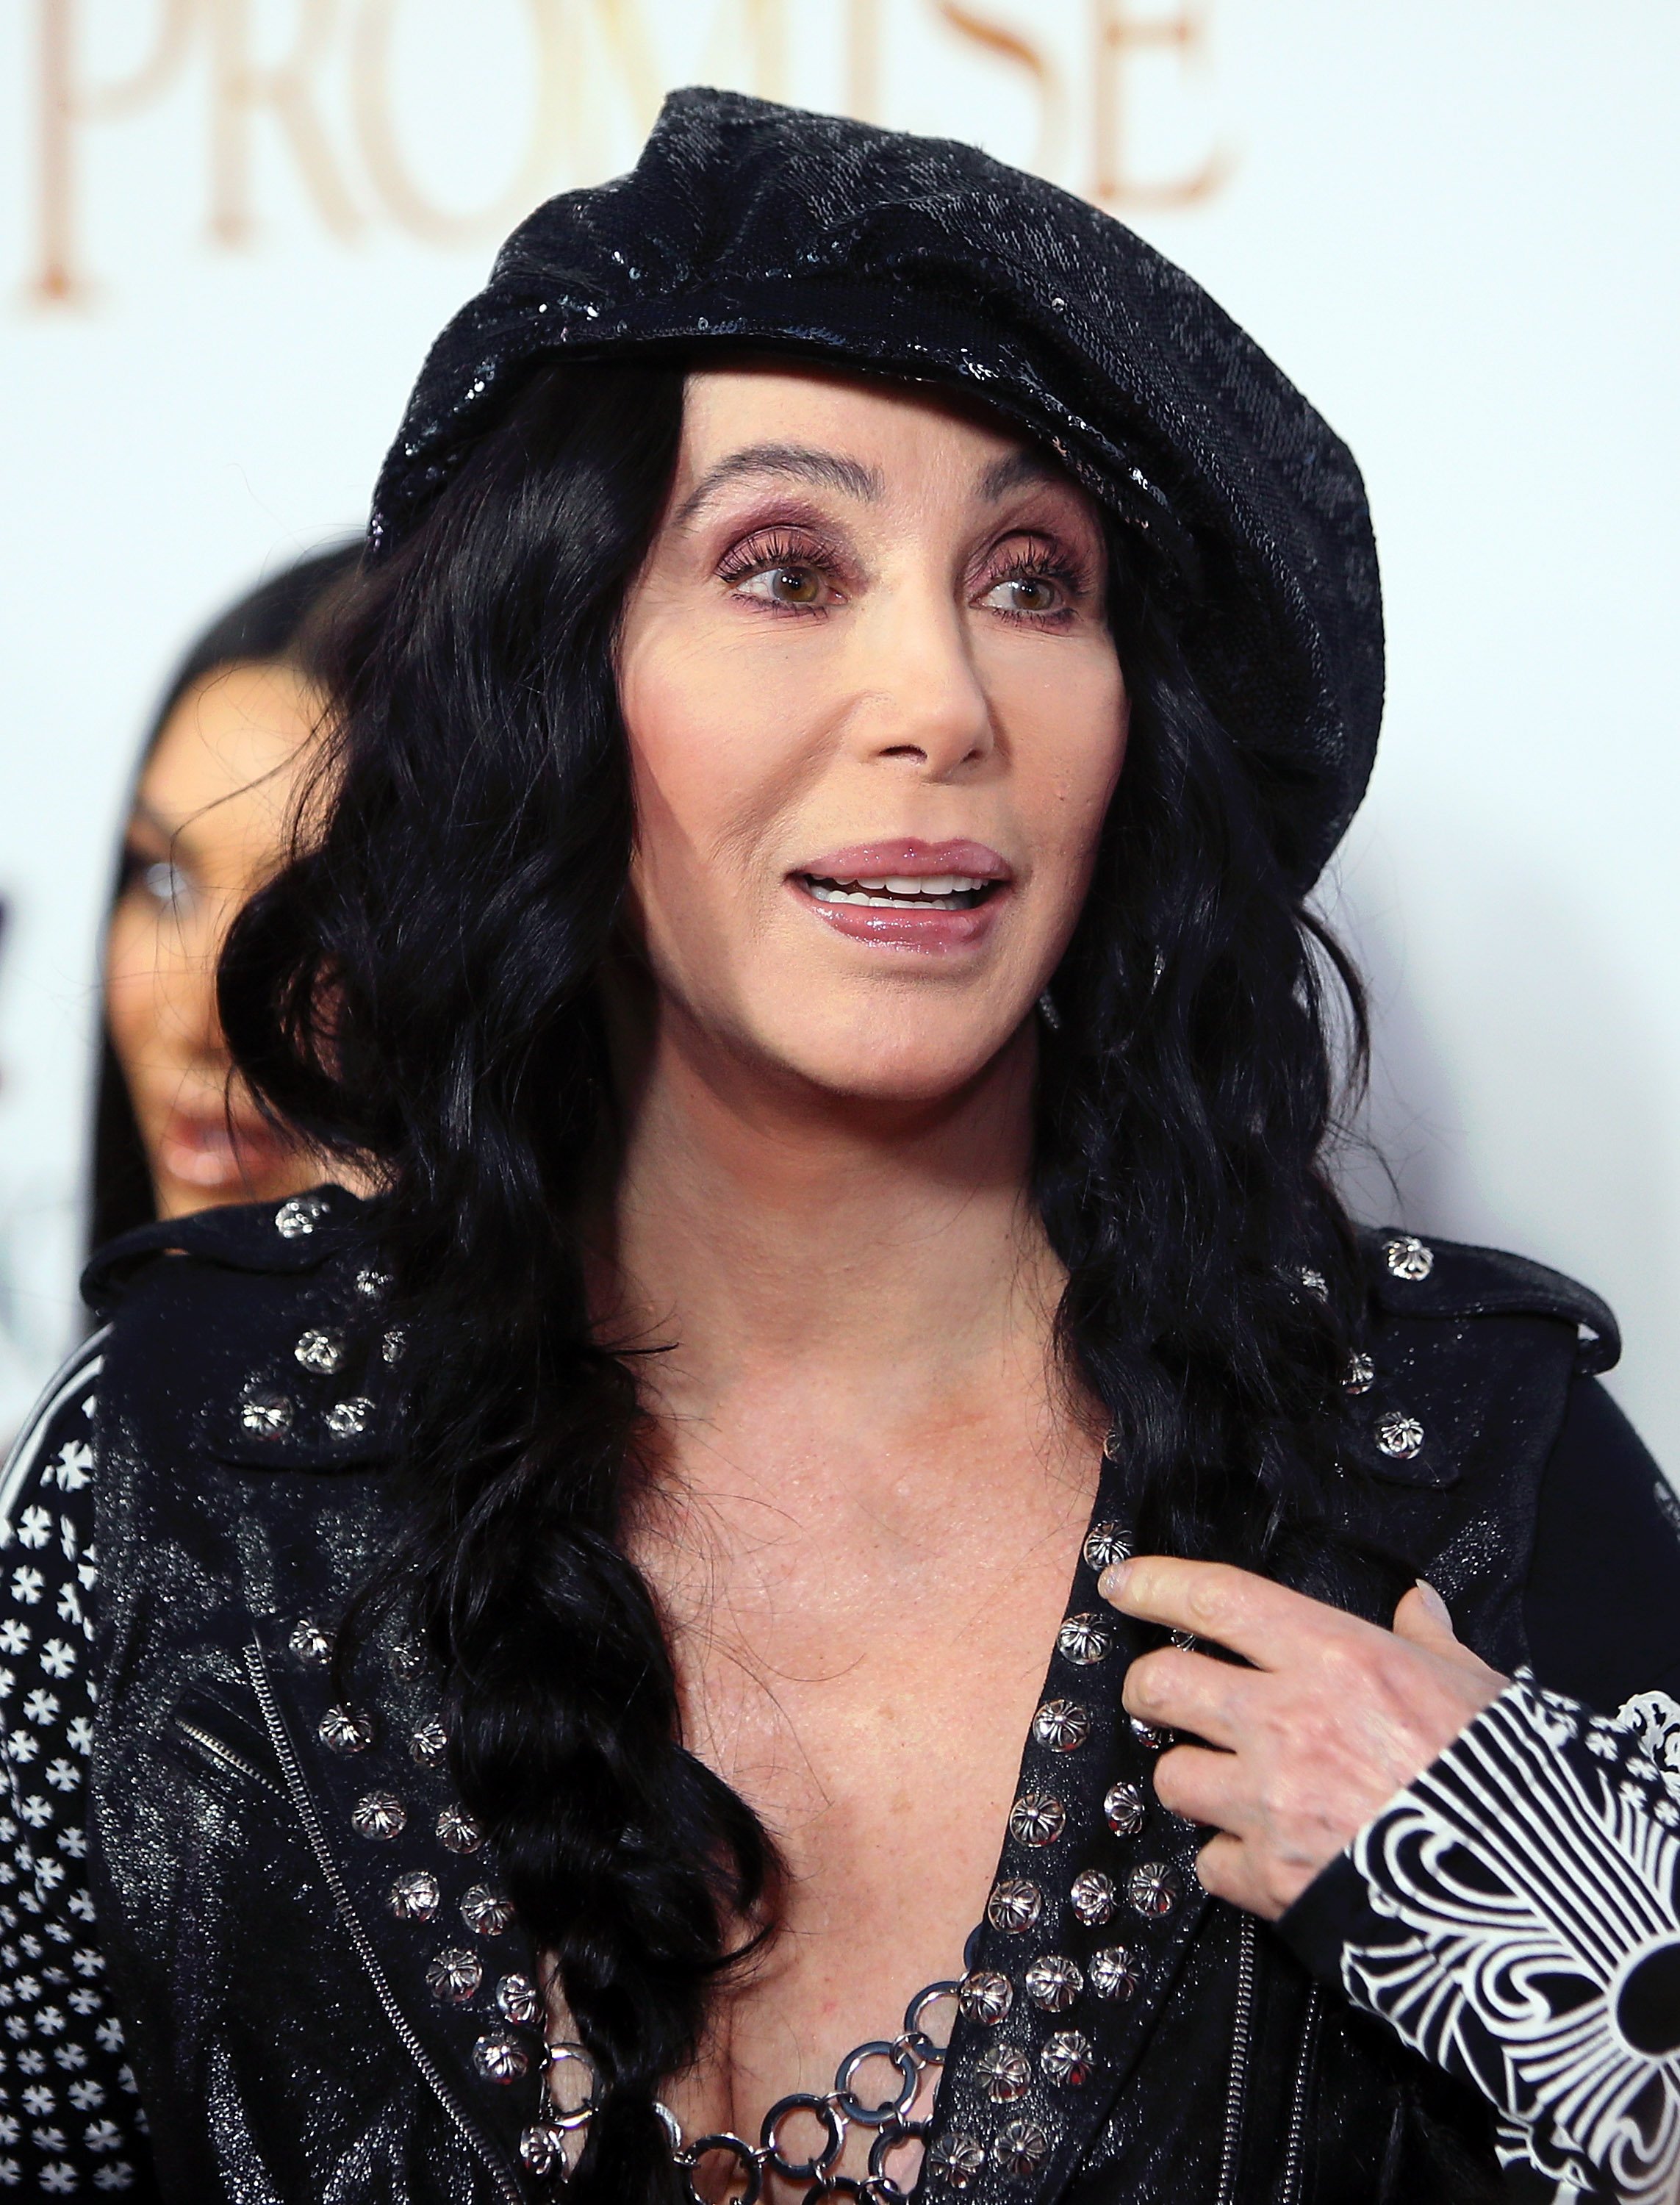 Cher pictured at the premiere of Open Road Films' "The Promise" at TCL Chinese Theatre, 2017 | Photo: Getty Images